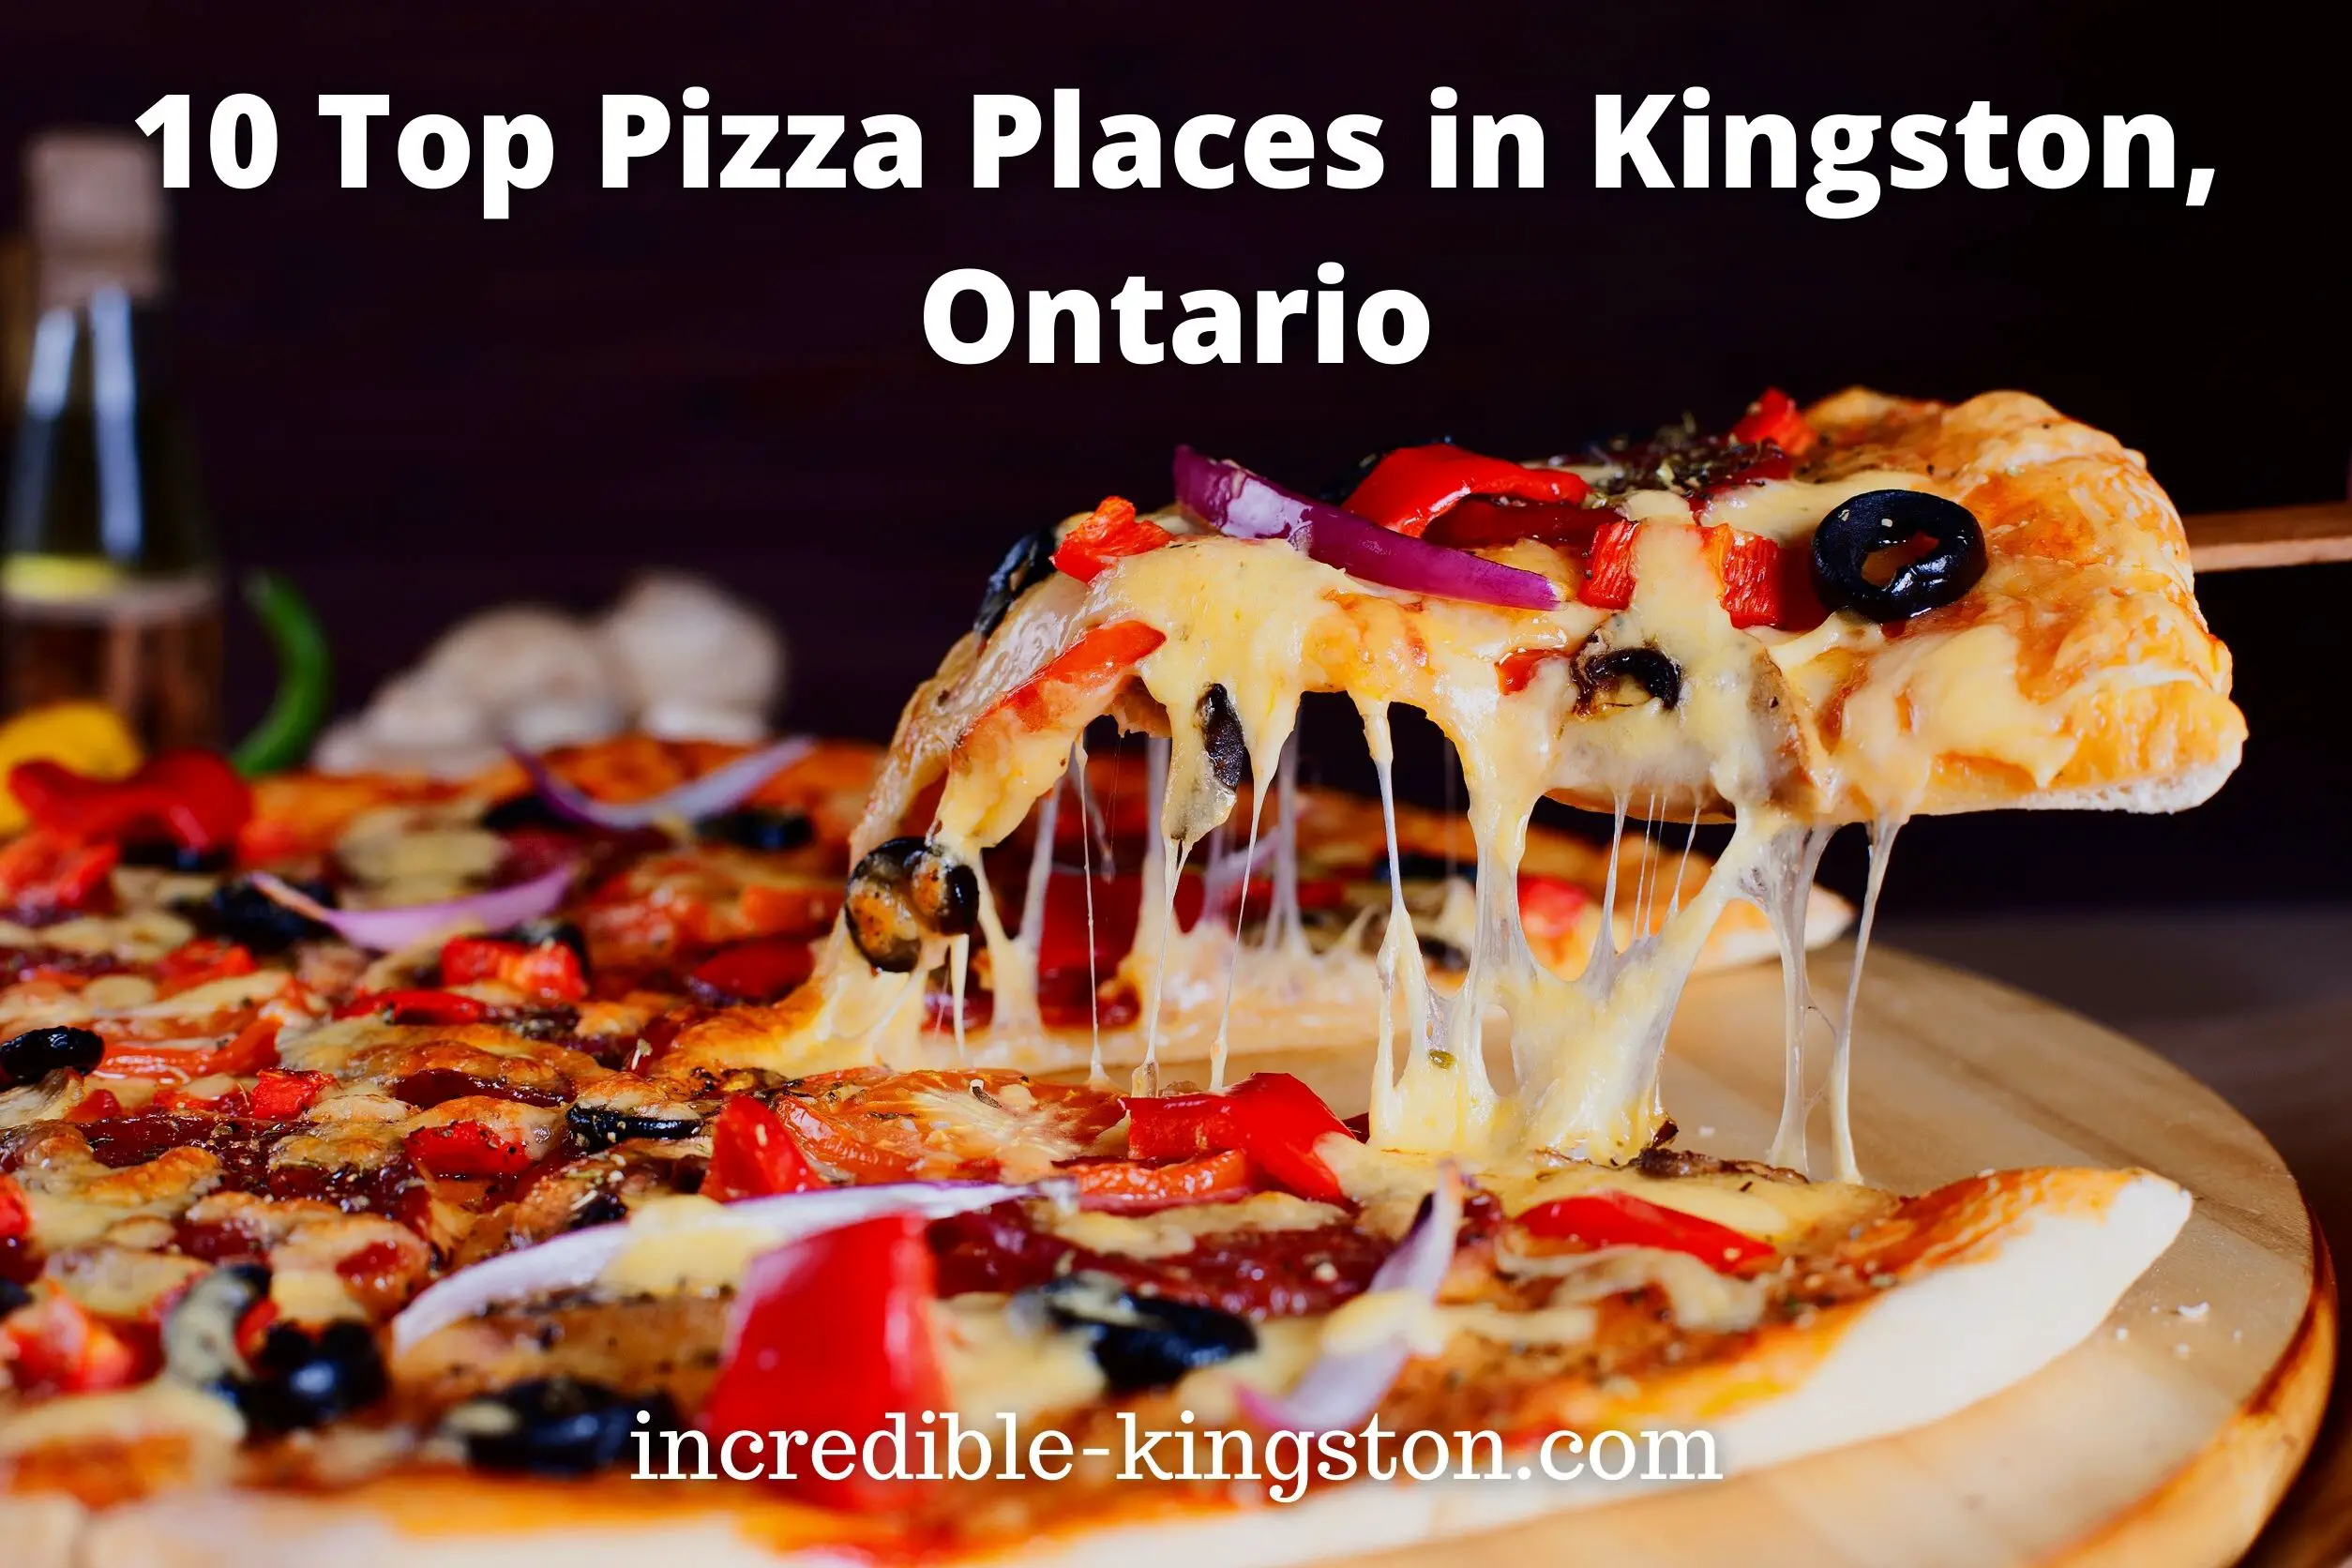 pizza places in Kingston, Ontario